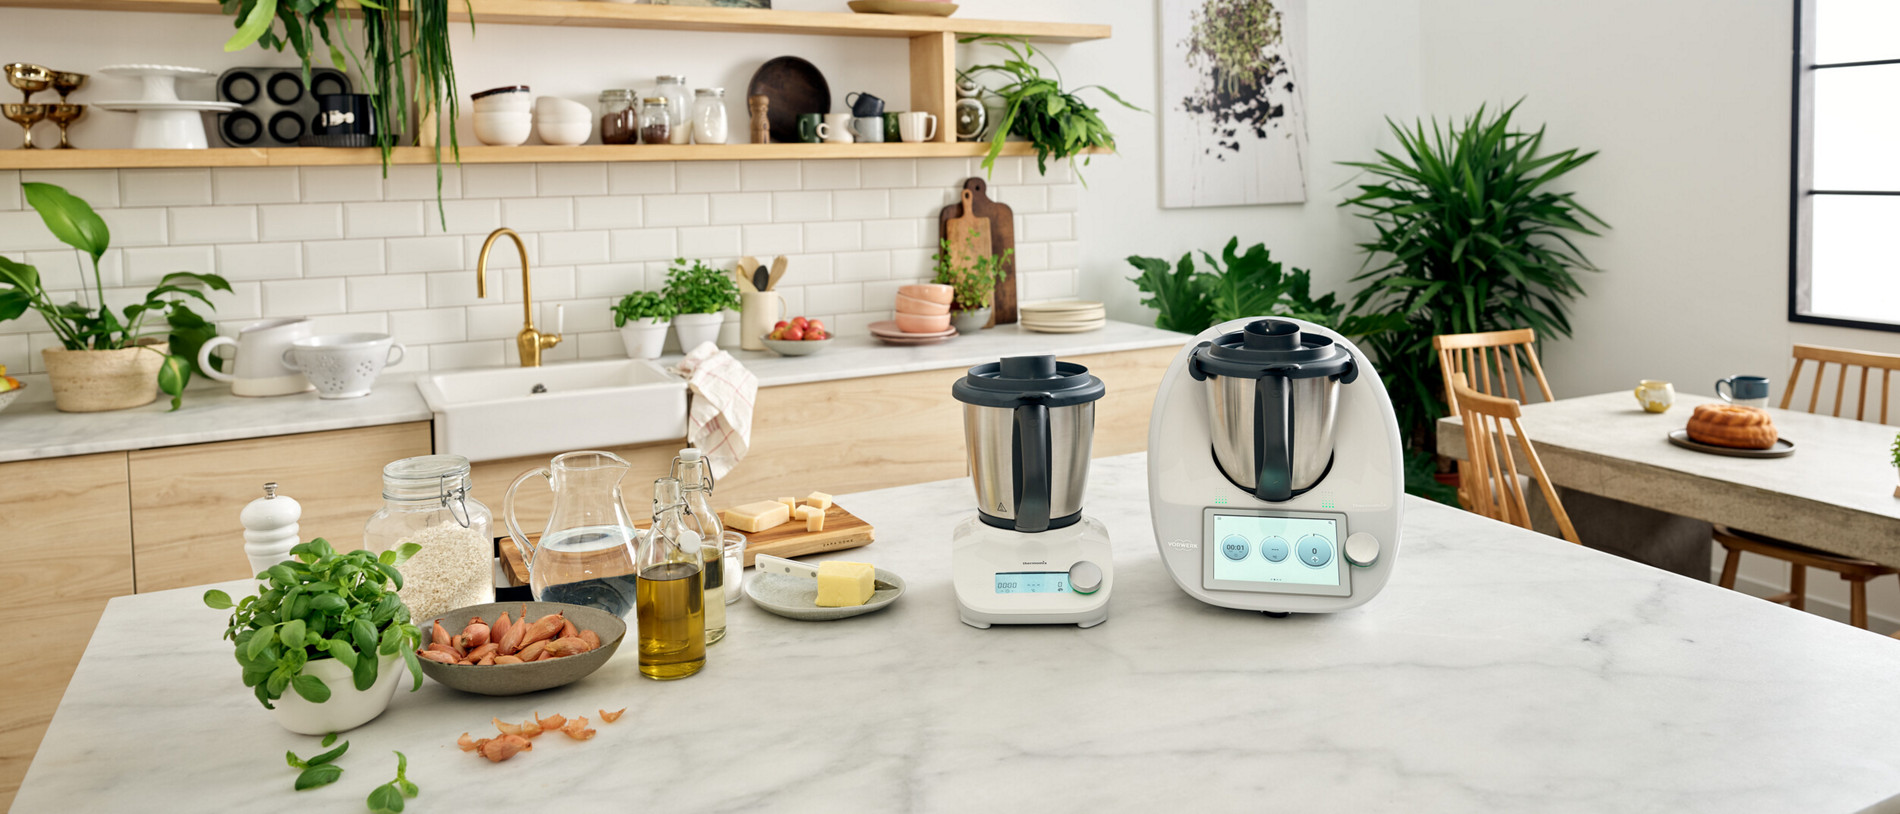 int thermomix friend TM6 product lifestyle product launch 008 medium